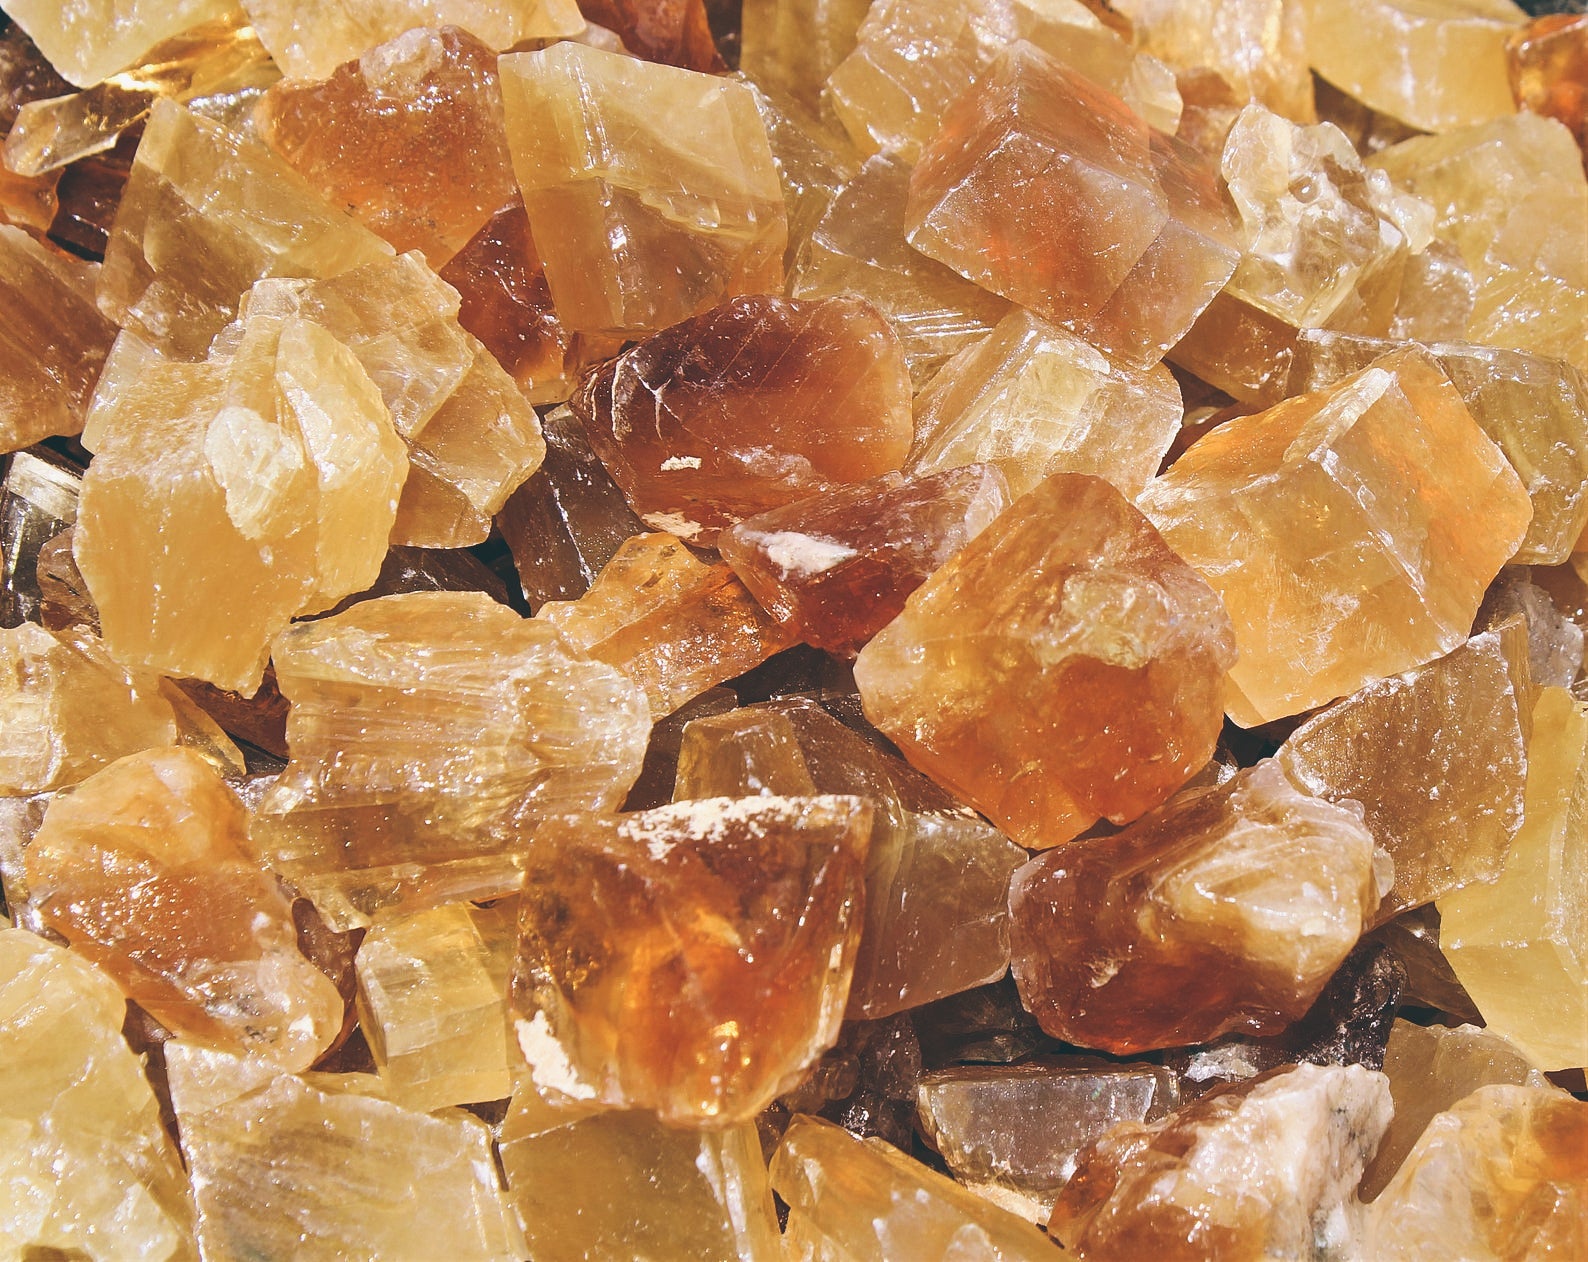 Honey Calcite Crystal Chunk - Time's Reel